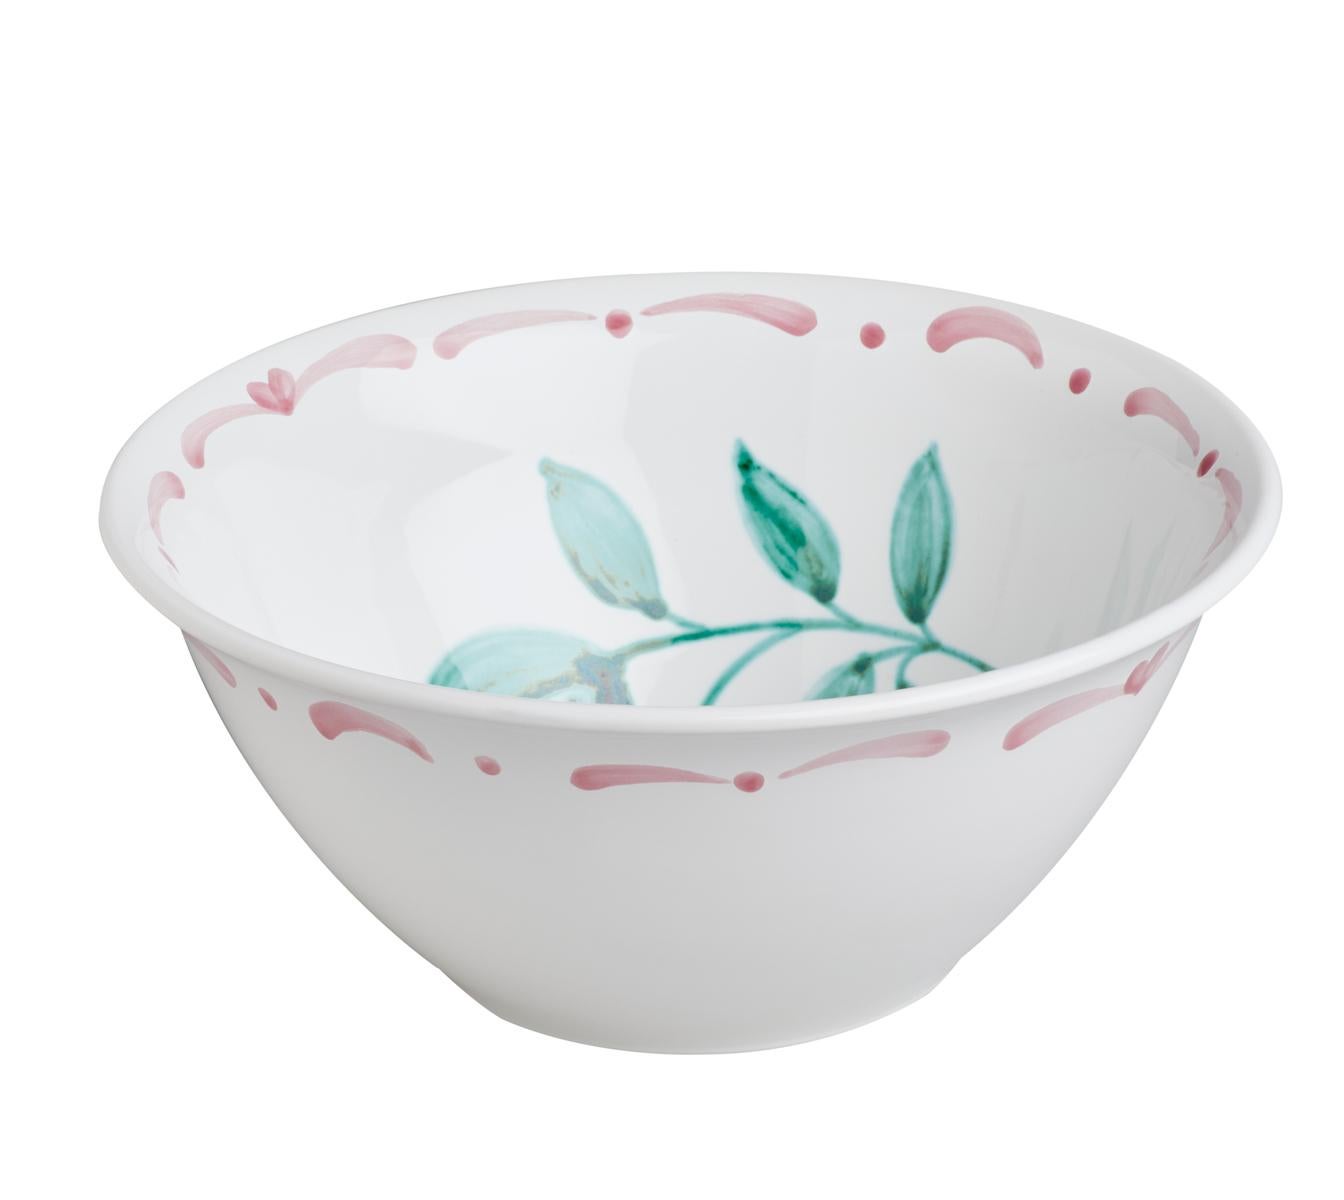 Large hands-free painted ceramic bowl. Decorated with a handpainted green pomegranate decor in the center with butterflies and a hands-free painted garlande in pink inside and outside. The garlande can be ordered in different colors. Produced in